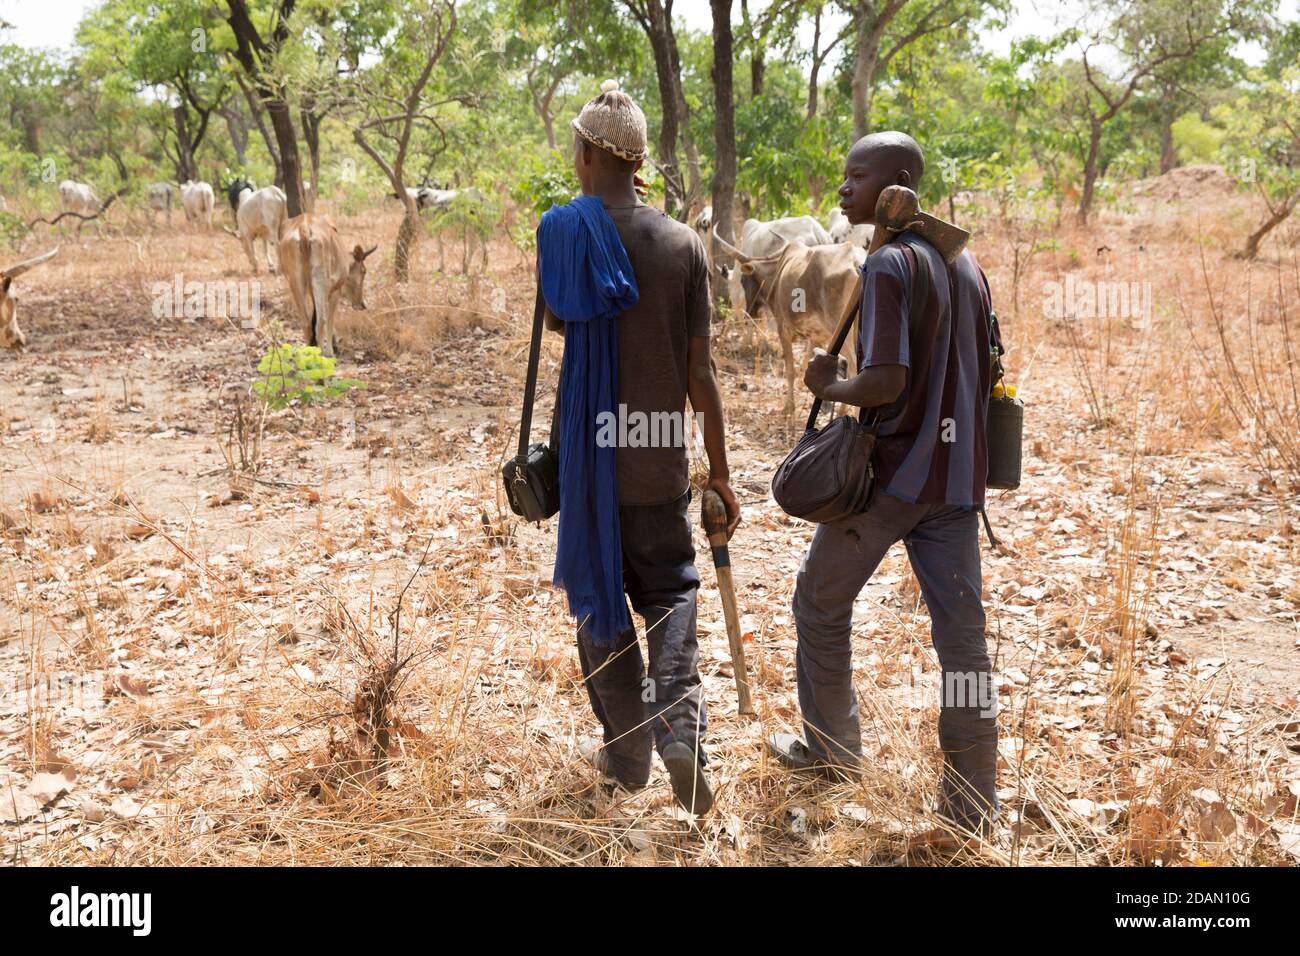 Selingue, Mali, 28th April 2015; Boya Diallo, 18, Fulani herdsman (wearing a hat) with Abdou Diarra, 17. Both came from Fana to Faraba, a distance of Stock Photo